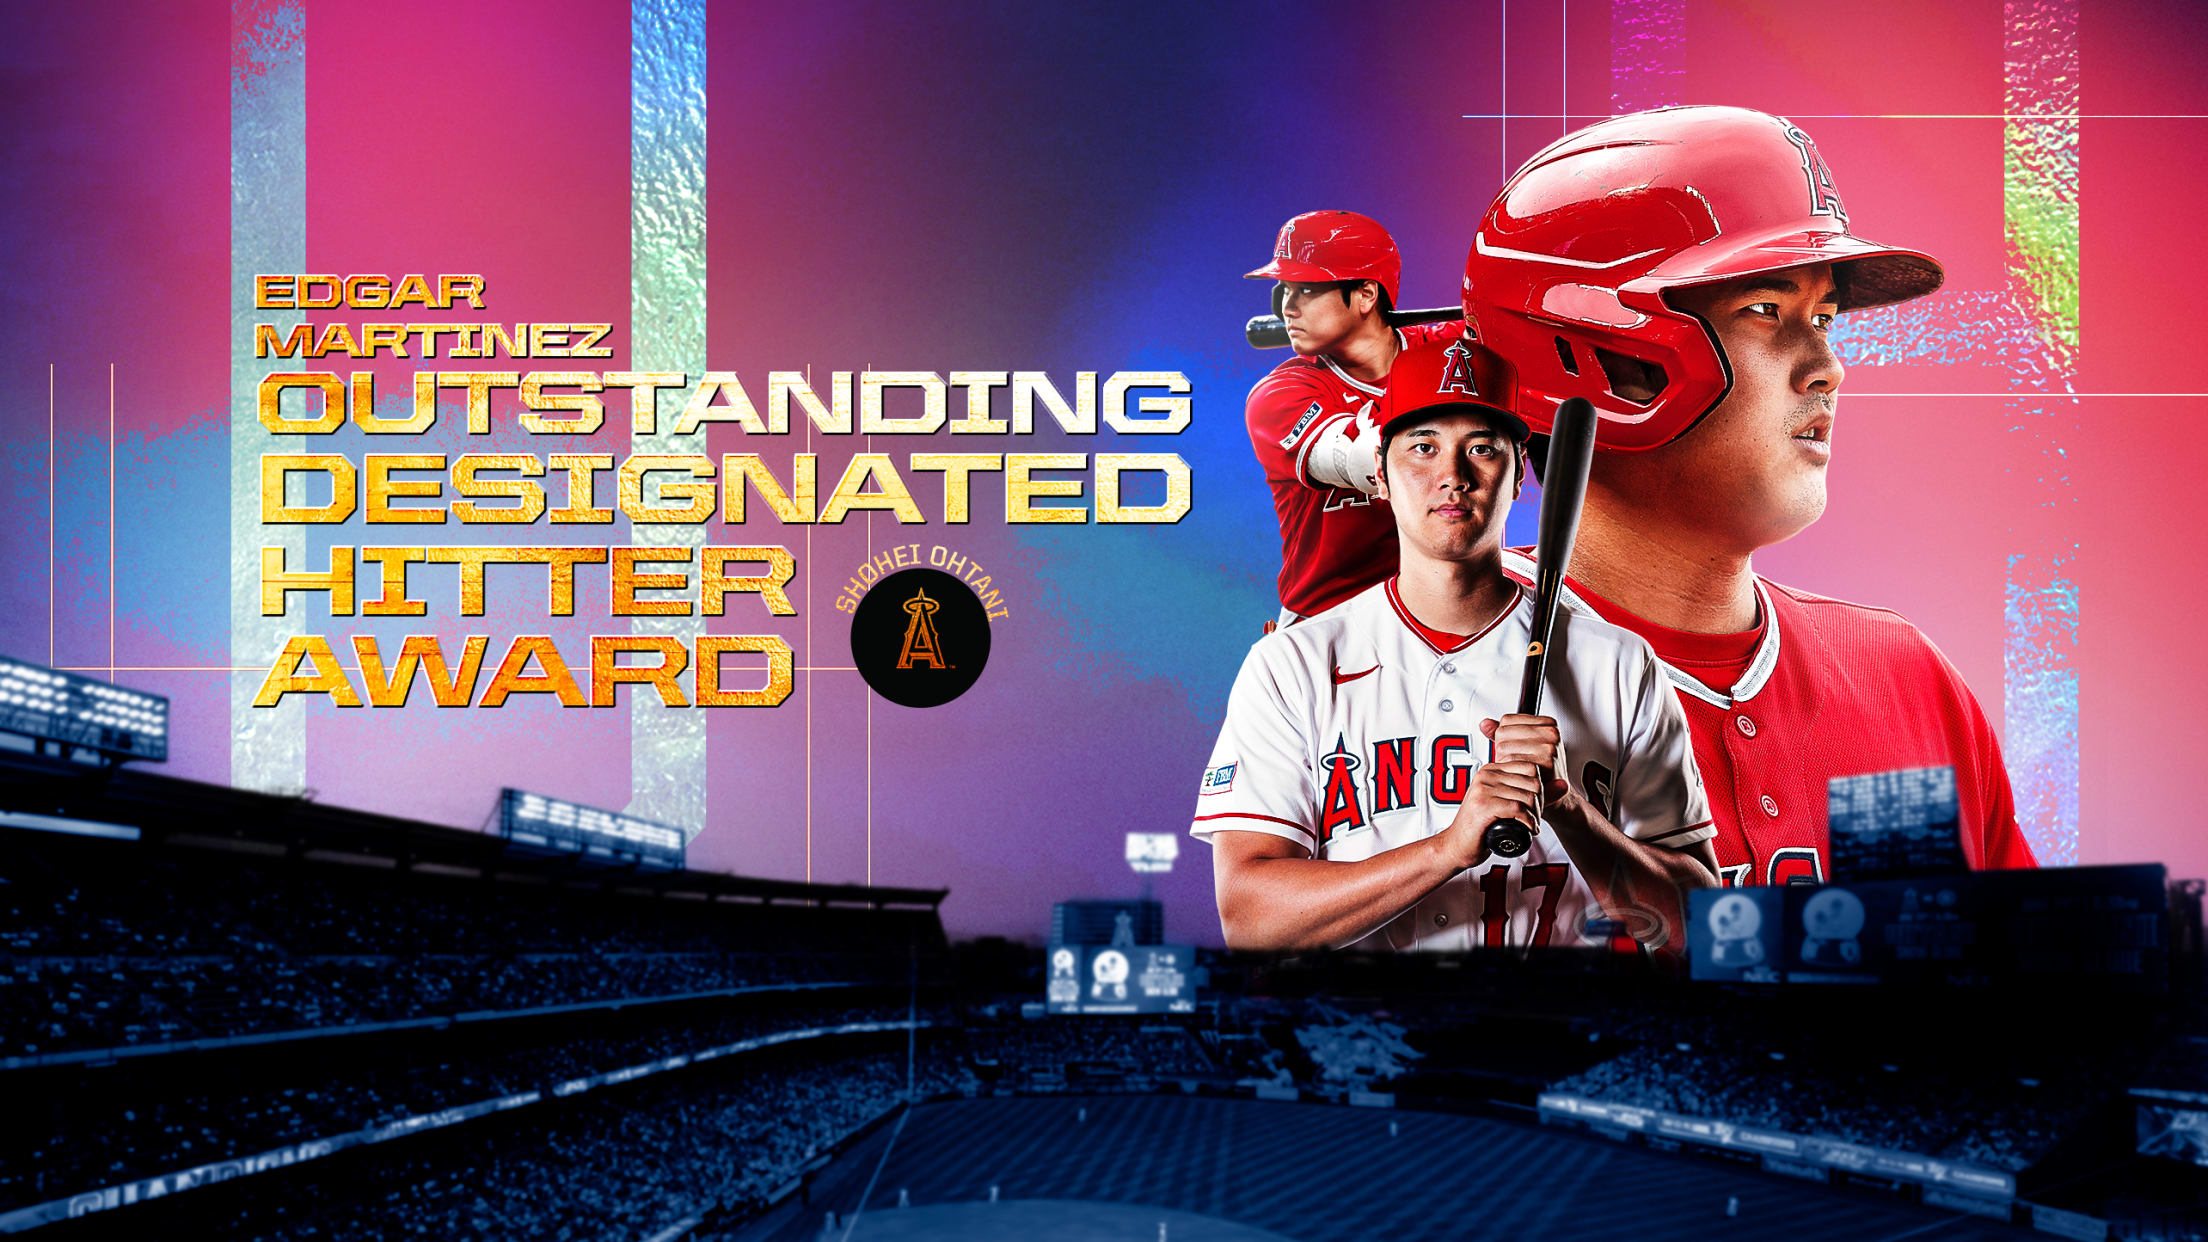 A photo illustration of Shohei Ohtani as the winner of the Edgar Martinez Outstanding DH Award